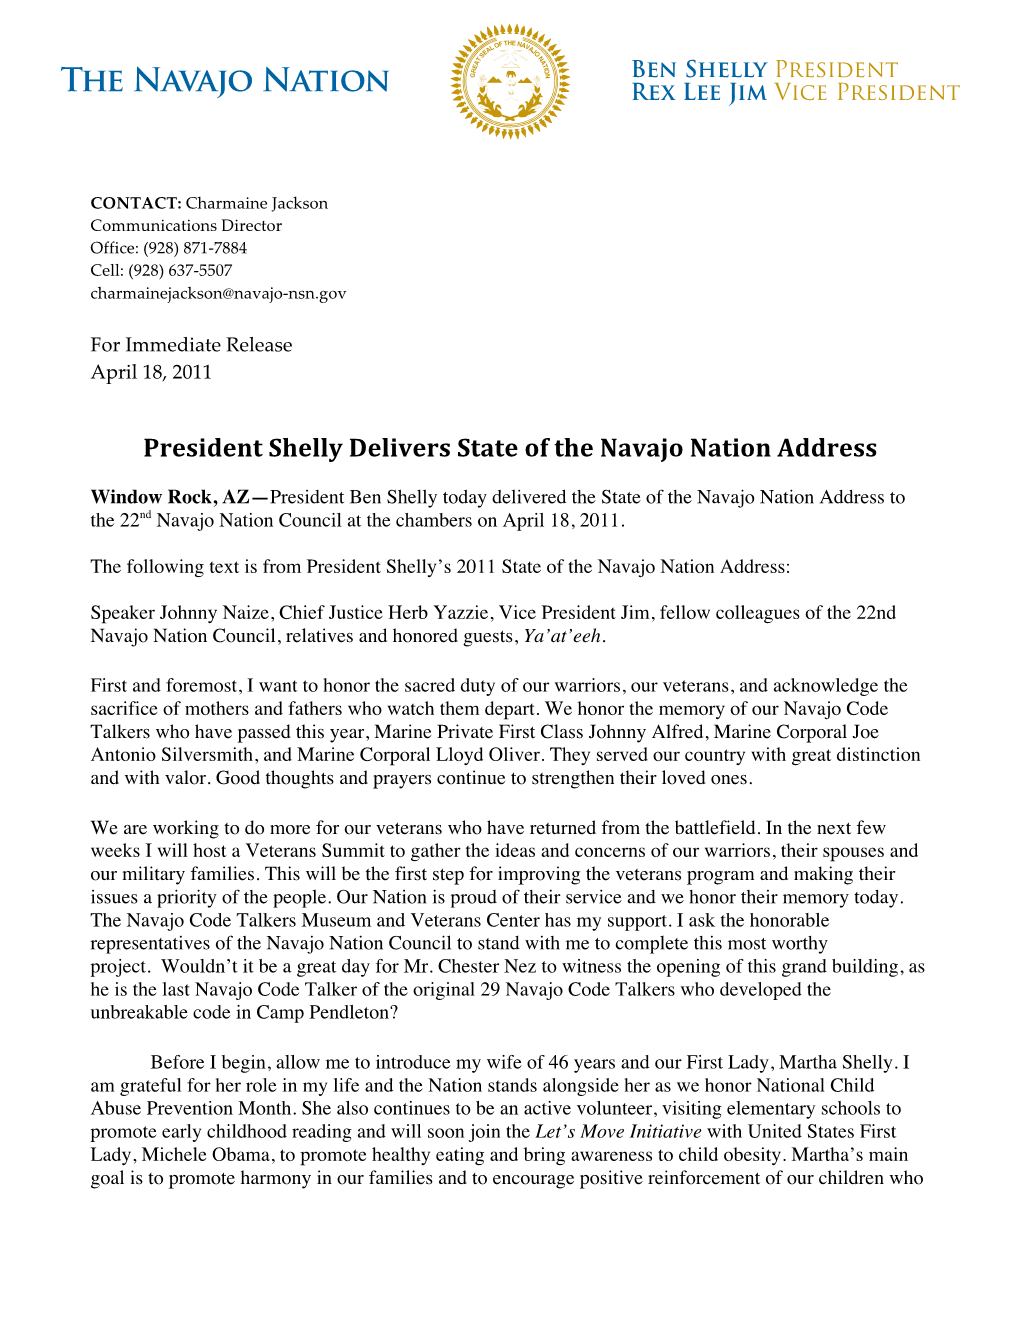 President Shelly Delivers State of the Navajo Nation Address